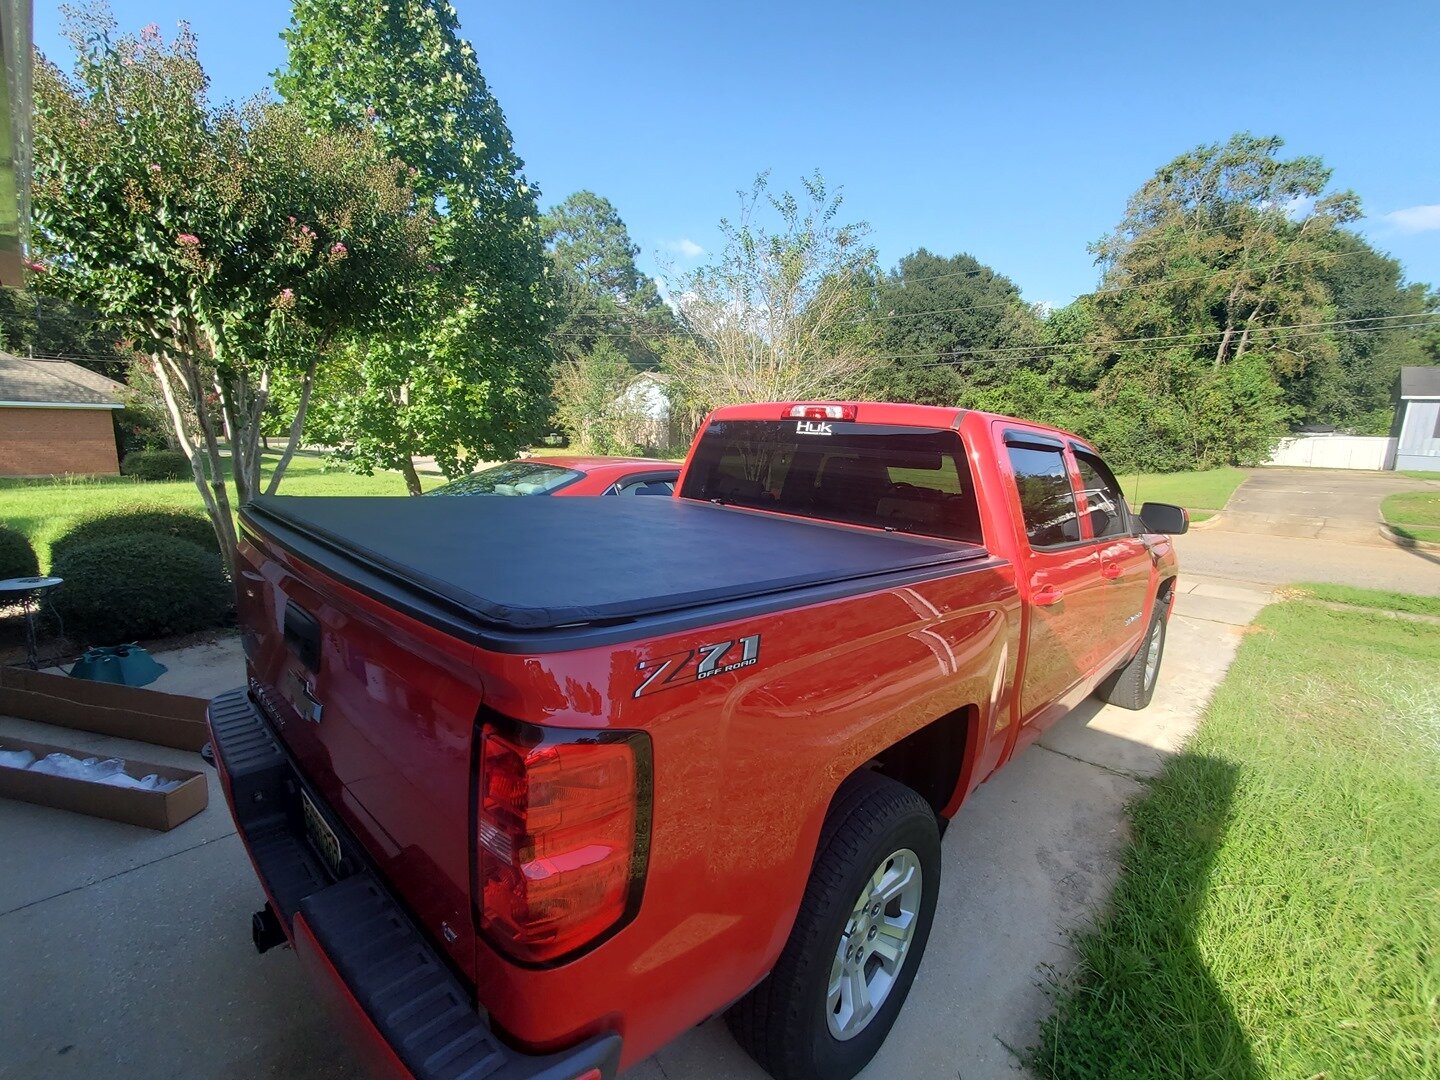 Keep it simple. Keep it safe. These roll-up tonneaus are the classic that never goes out of style!

#ProvenGround
#liftedtrucks
#TrucksDaily
#Trucks
#S112602